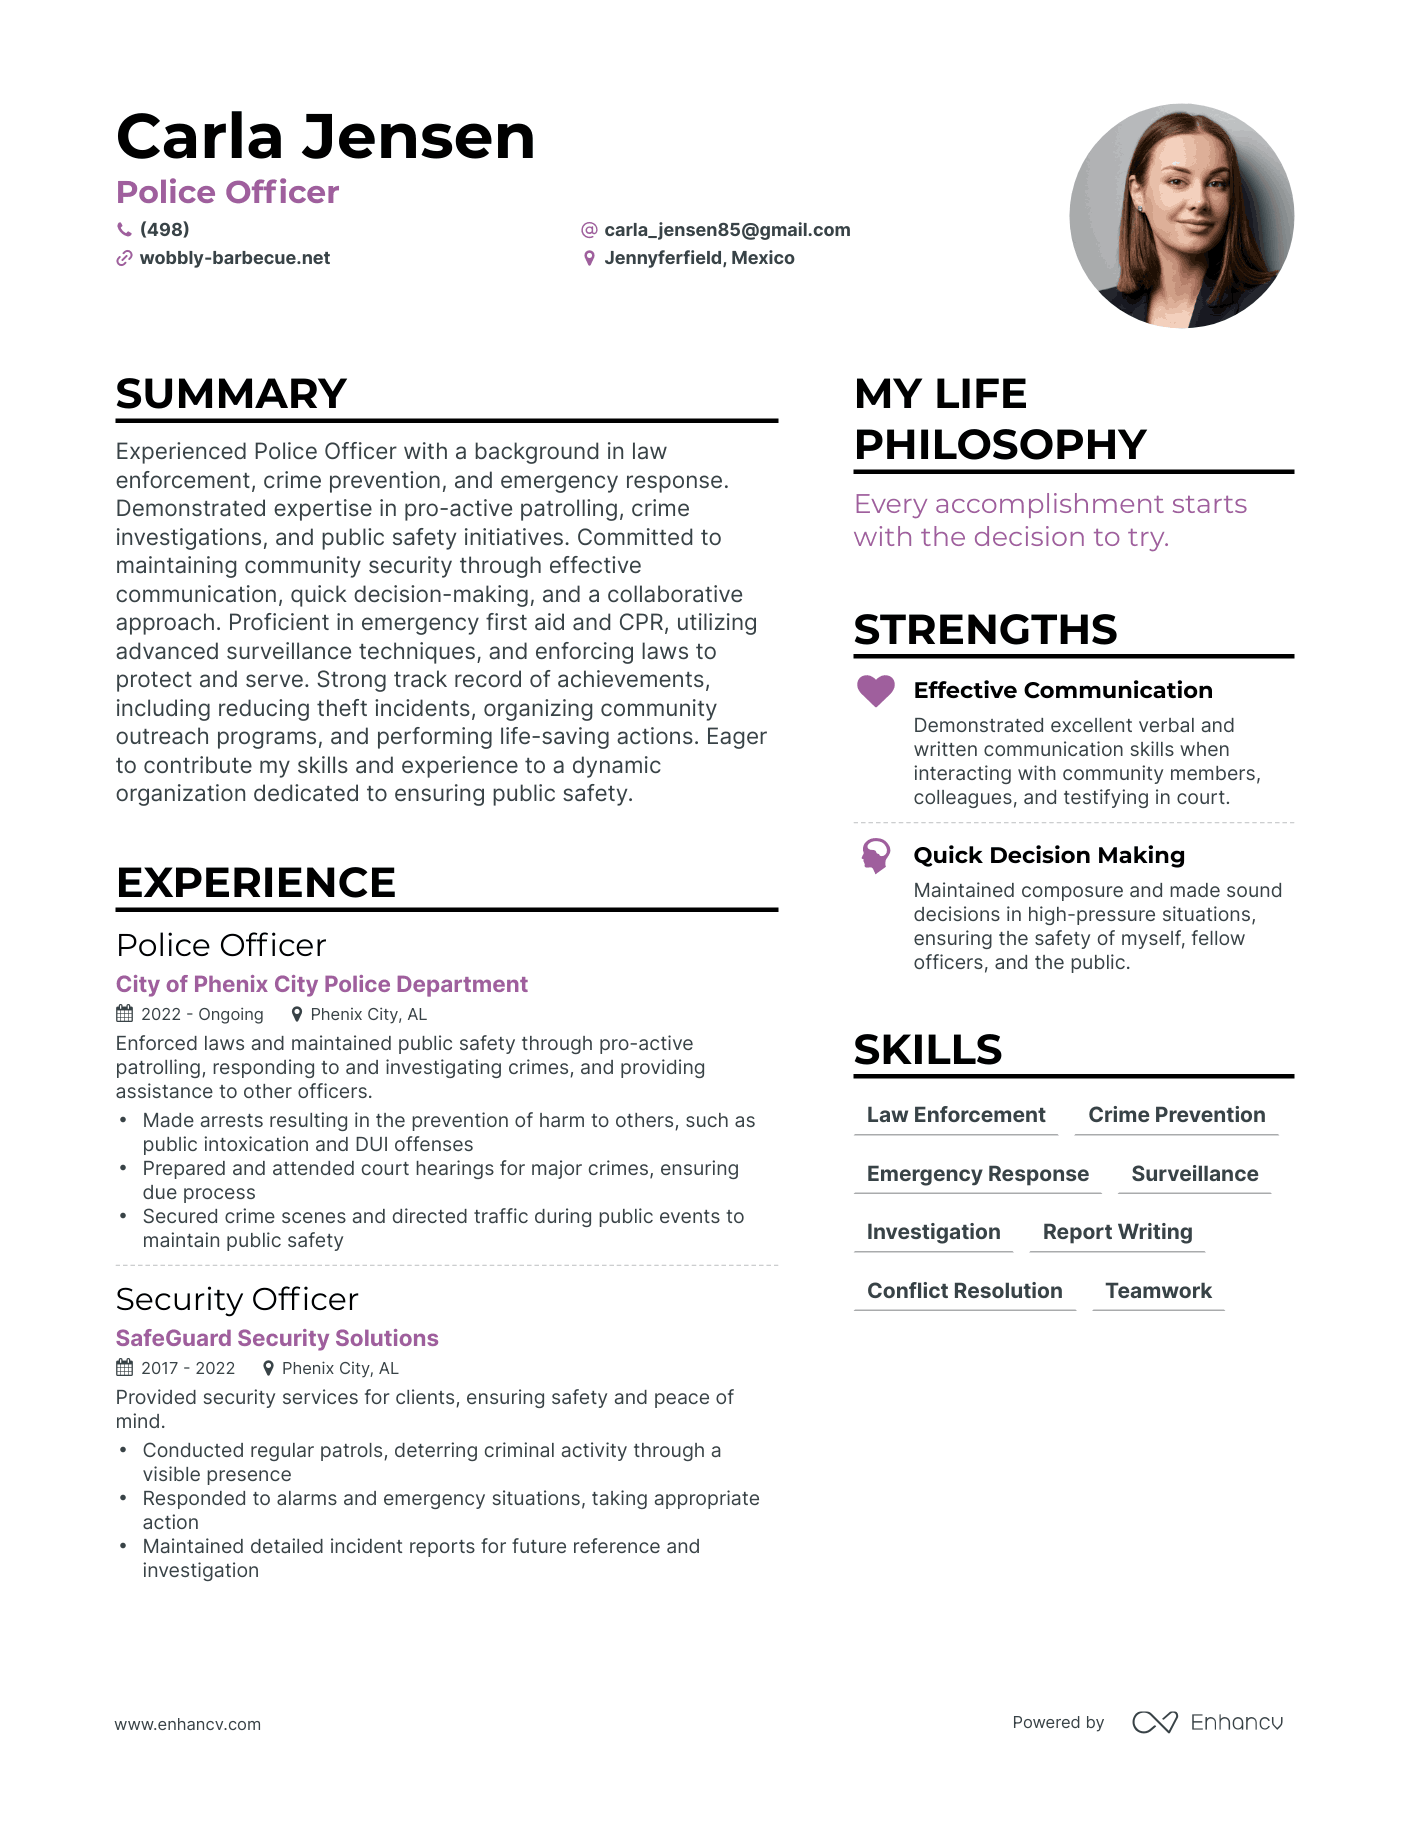 Police Officer resume example